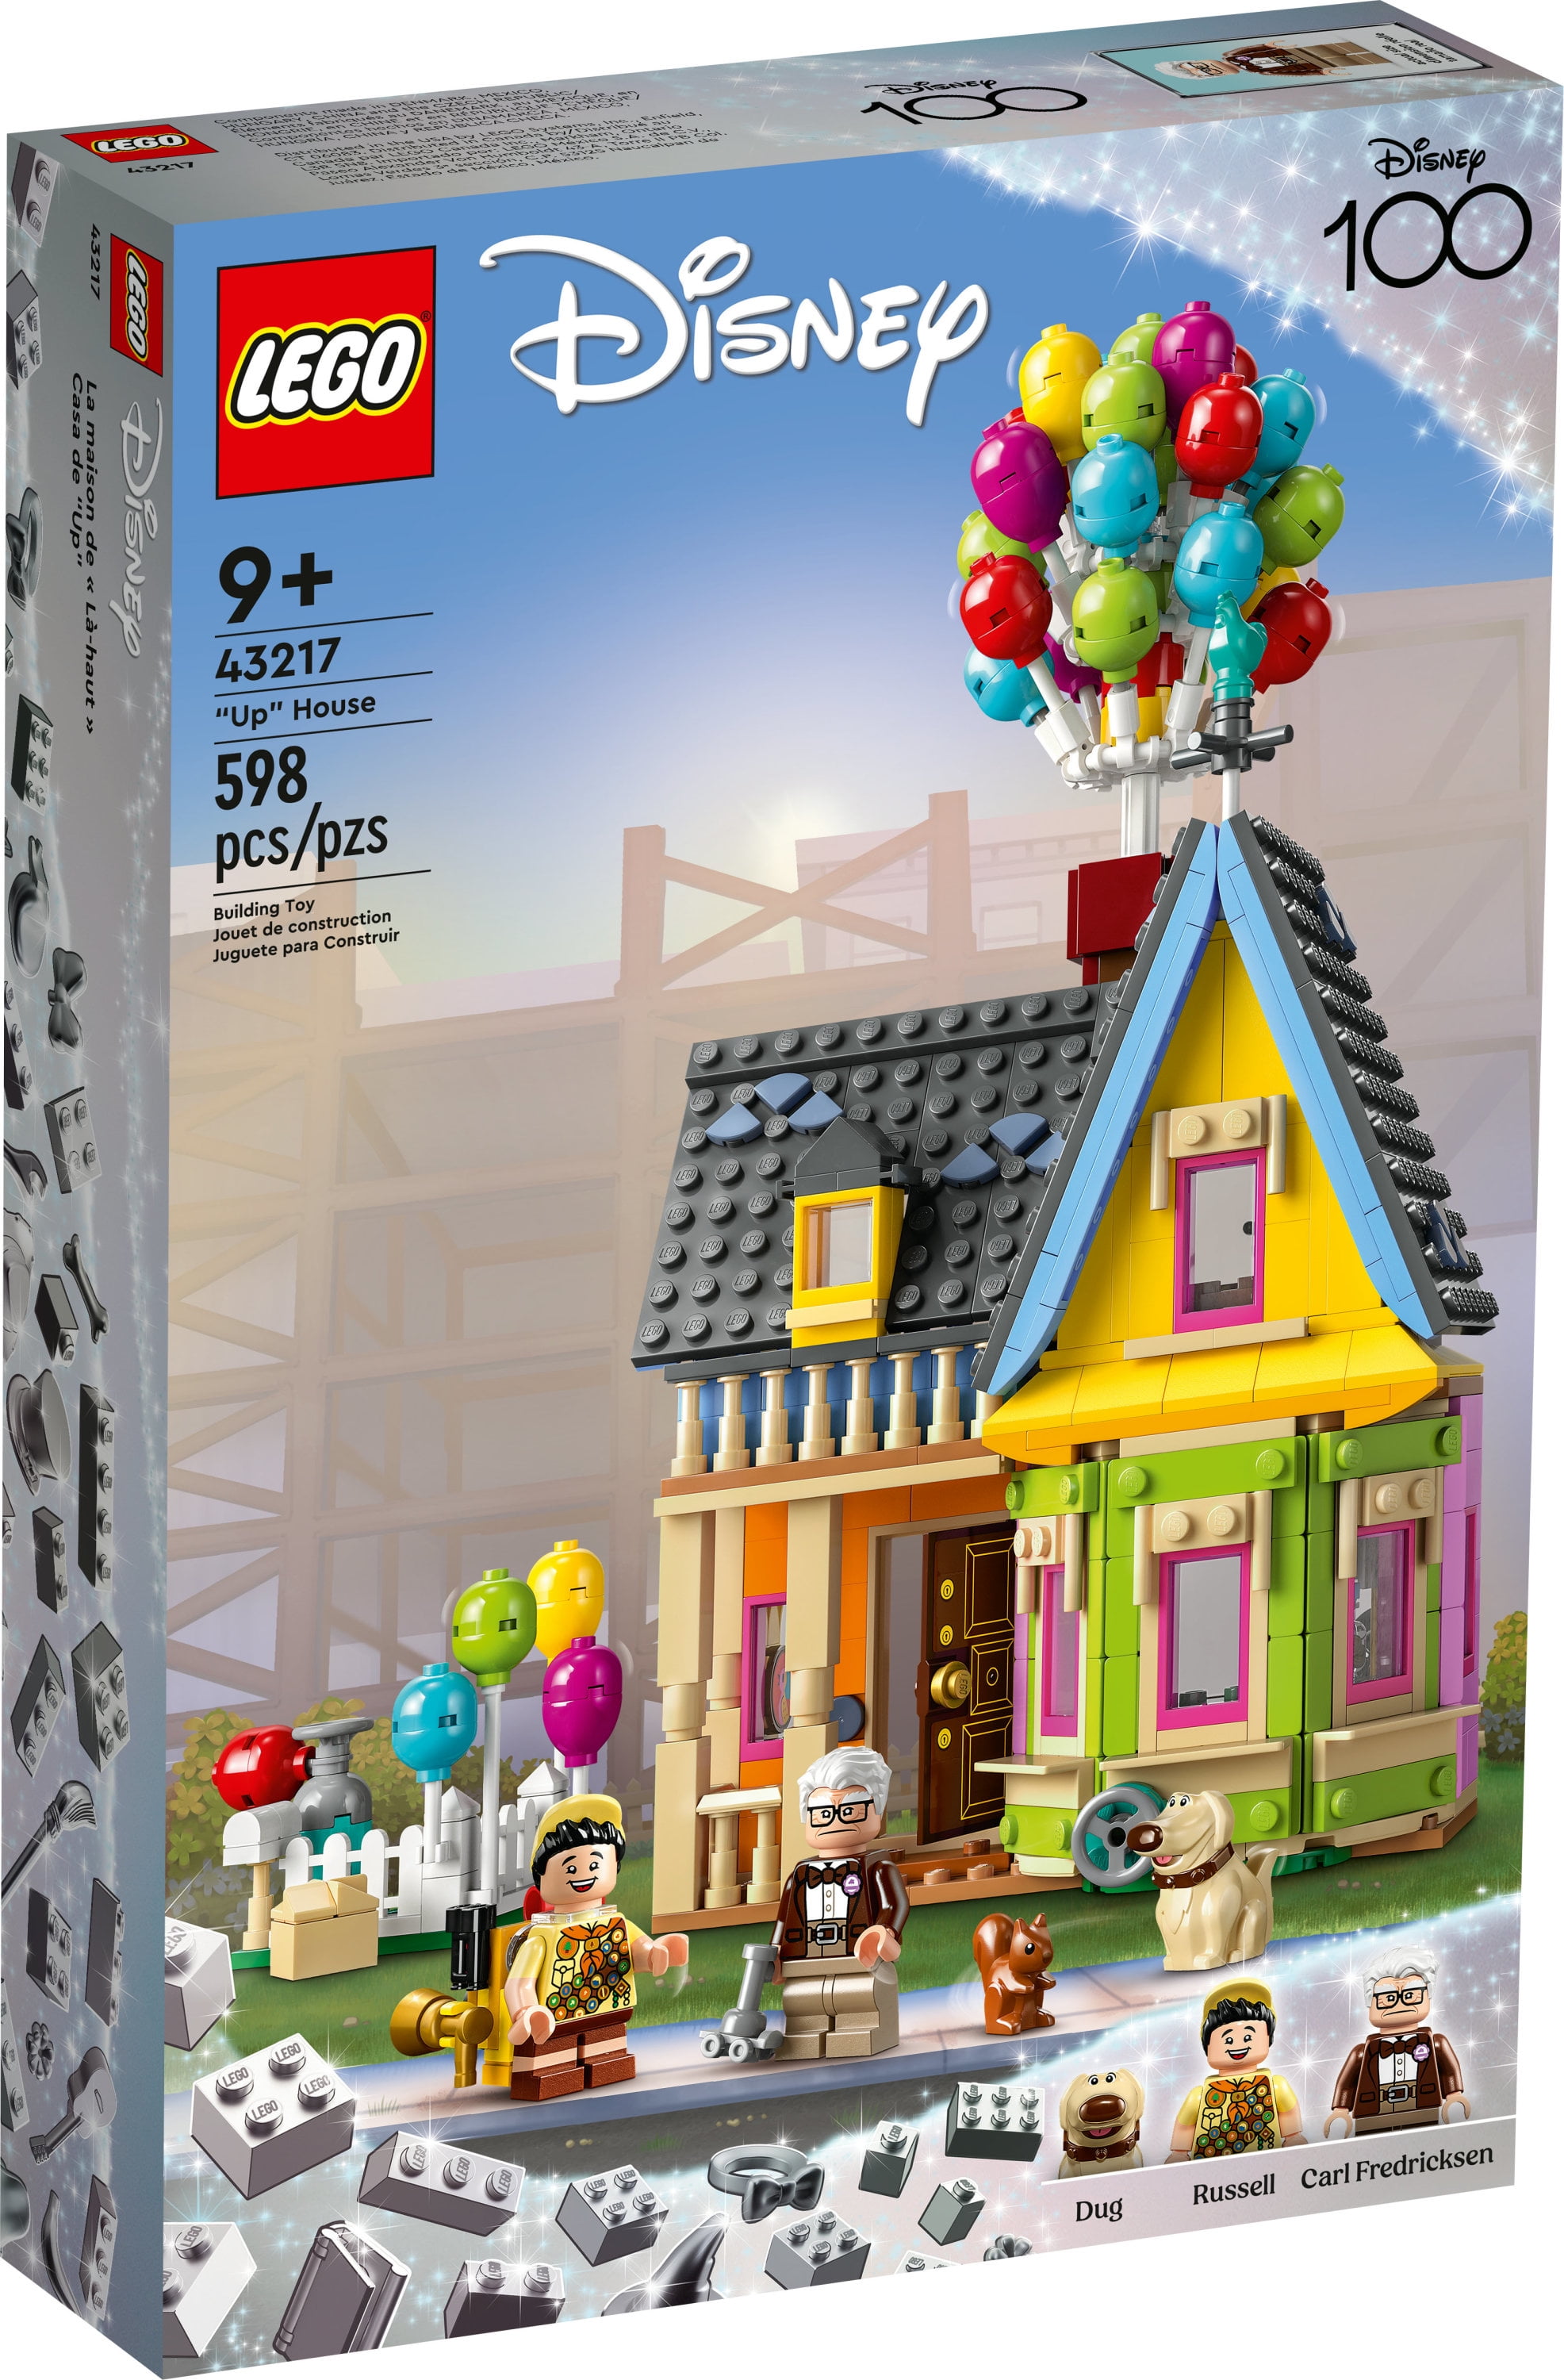 LEGO Disney and Pixar ‘Up’ House 43217 Disney 100 Celebration Classic  Building Toy Set for Kids and Movie Fans Ages 9+, A Fun Gift for Disney  Fans and